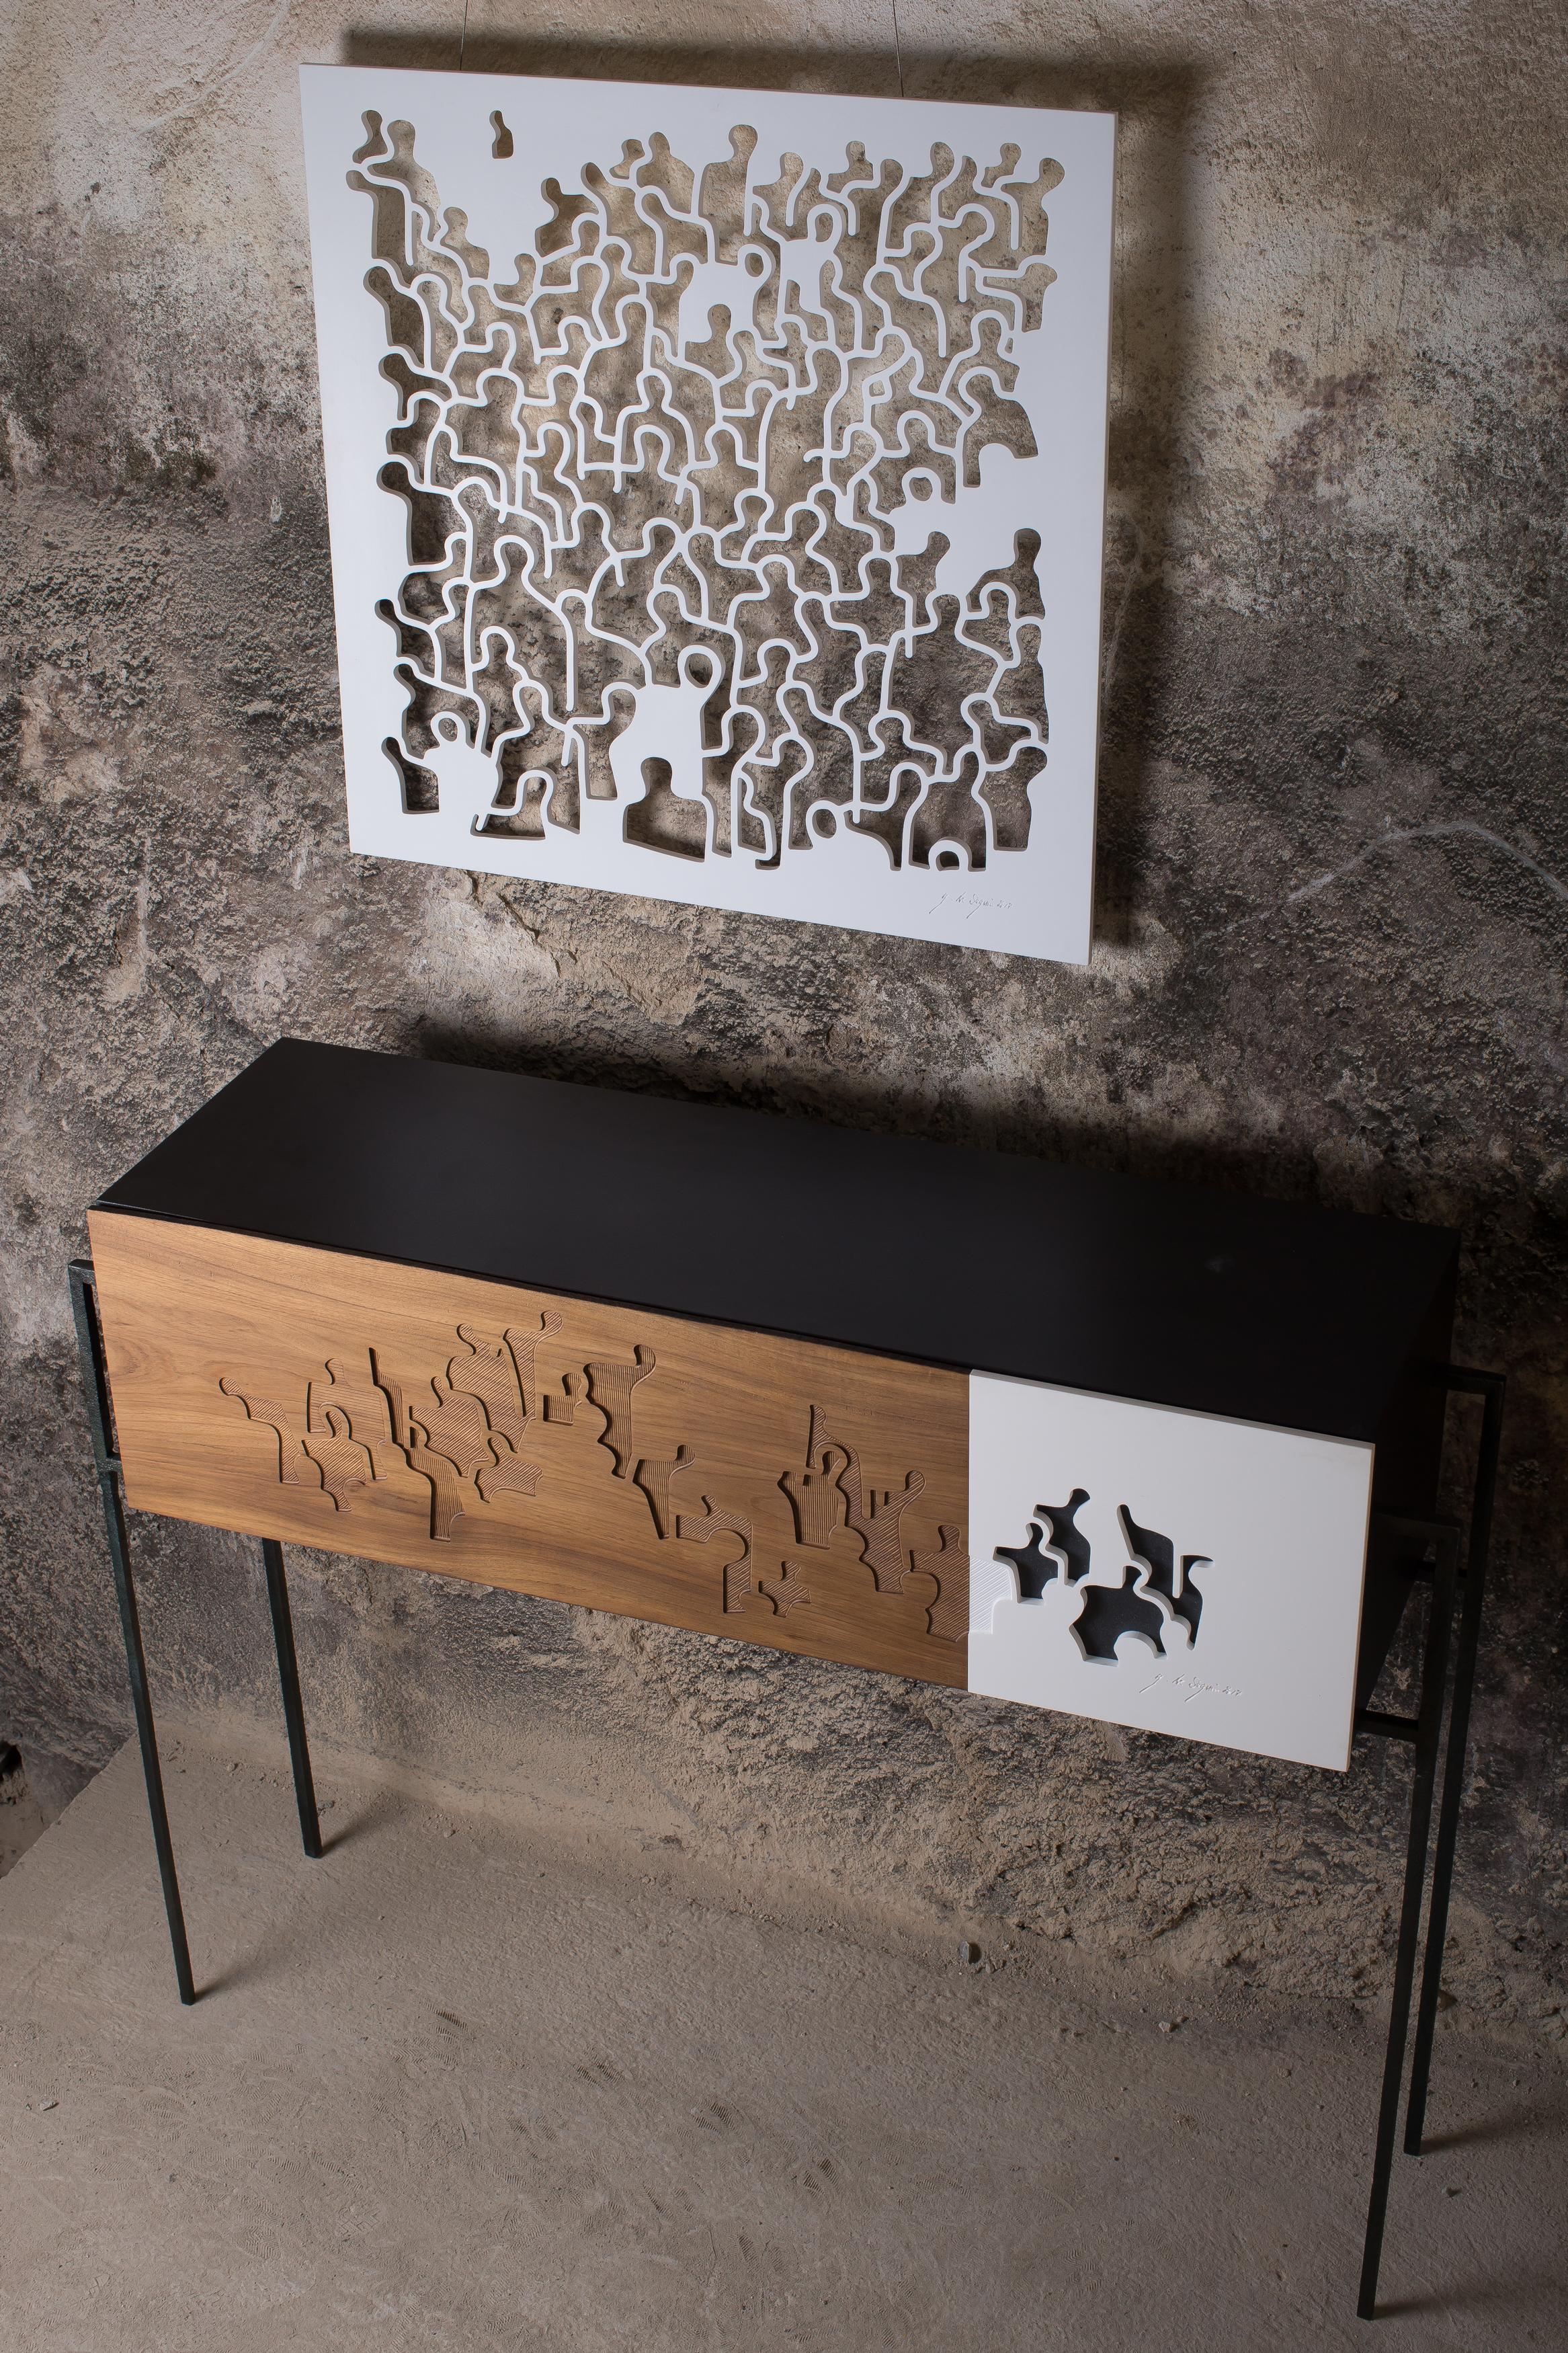 This is a beatuiful sideboard with interior shelves handmade and designed in France by Eric Blanc. The front is covered with a unique artwork by artist Gaetan de Seguin. It is a captivating piece of furniture, elegant and minimalistic in its design.